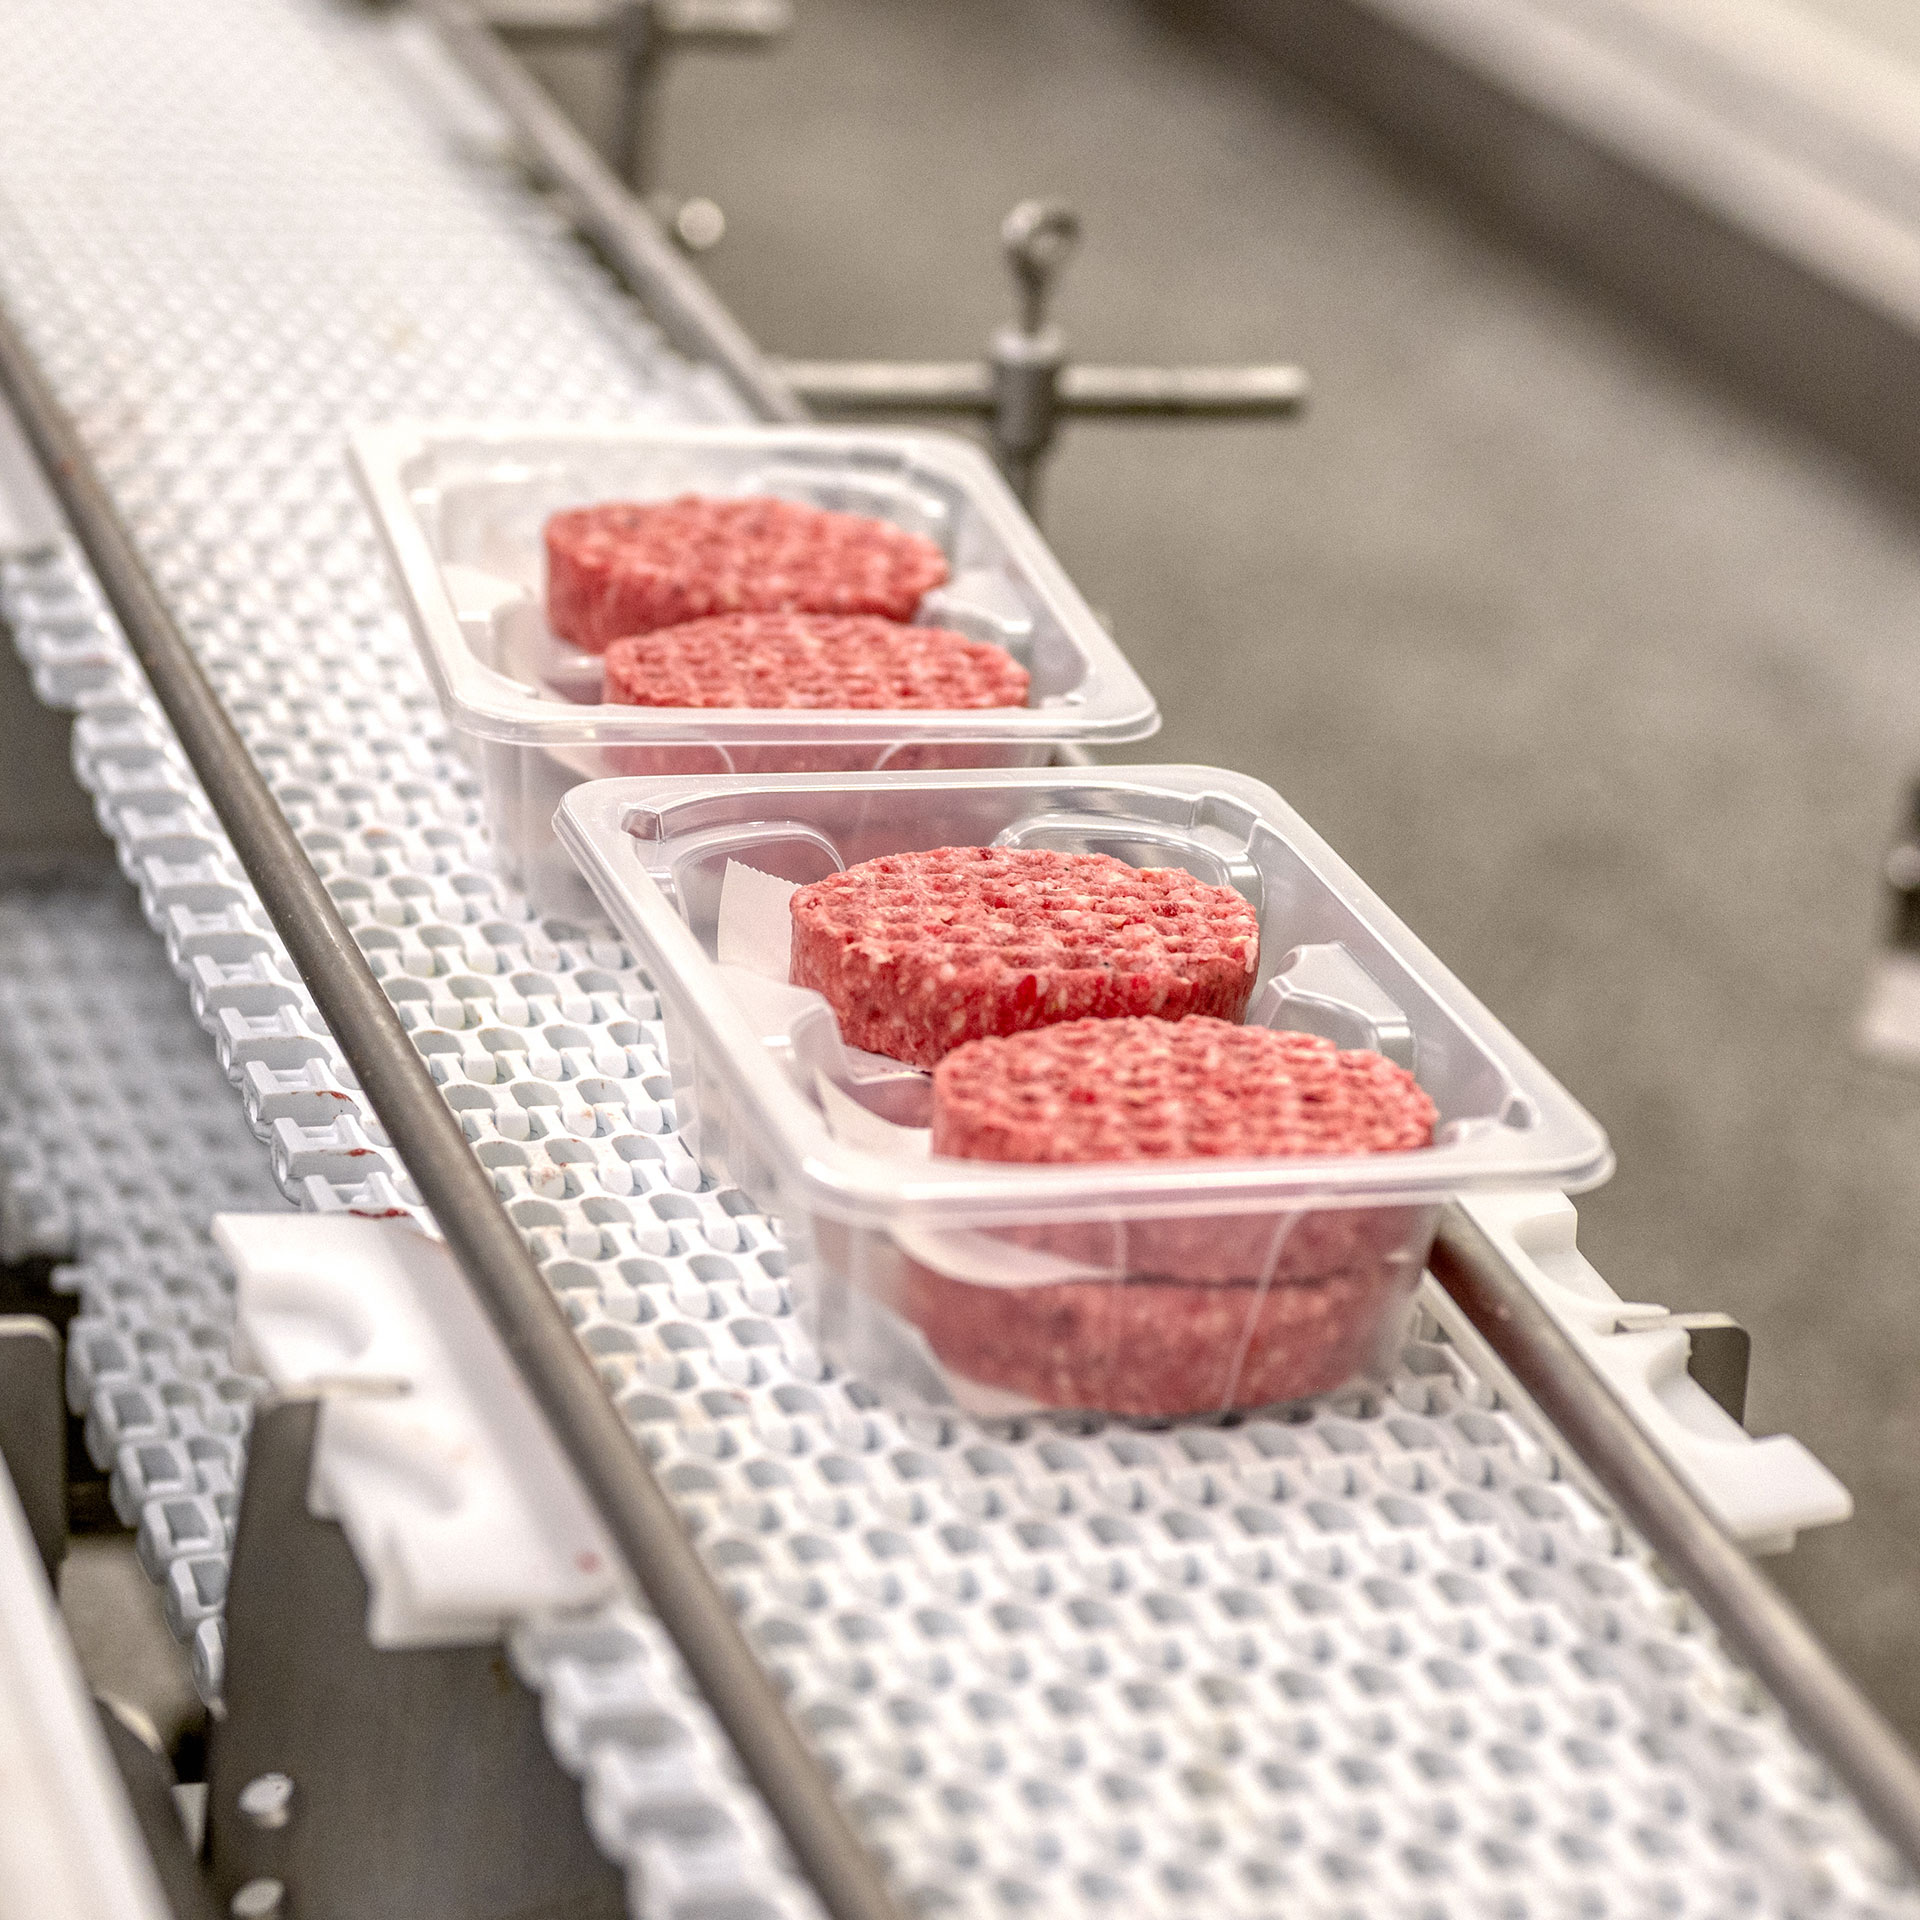 Ground beef on a conveyor belt, processed meat